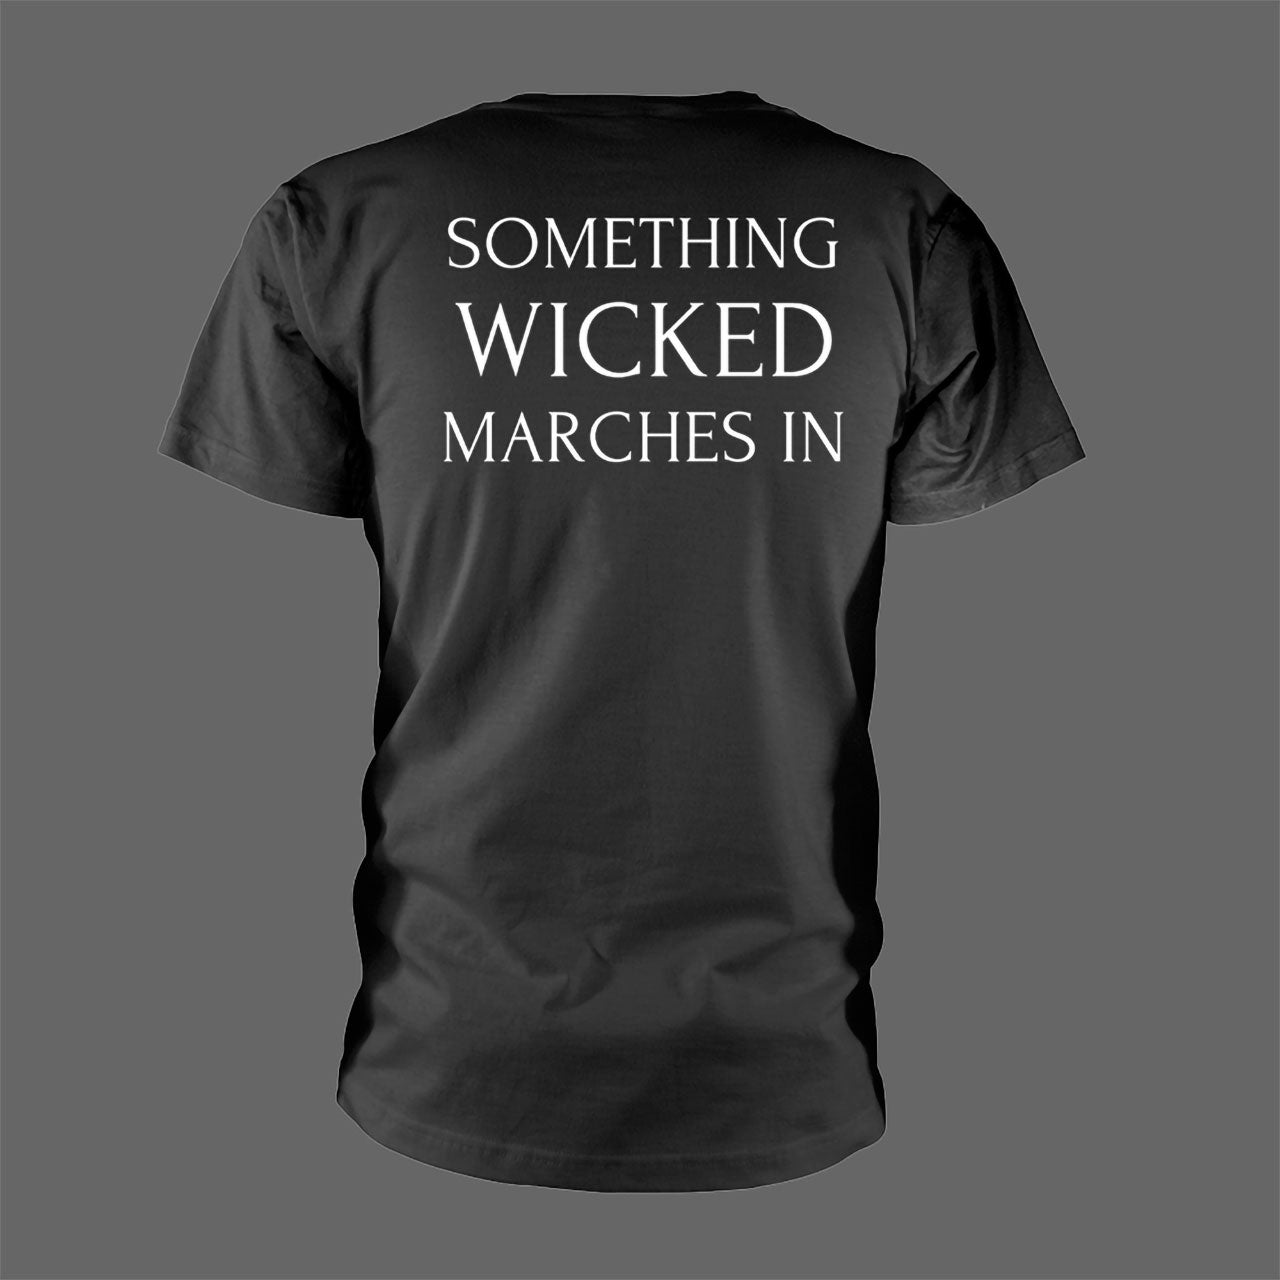 Vltimas - Something Wicked Marches In (T-Shirt)